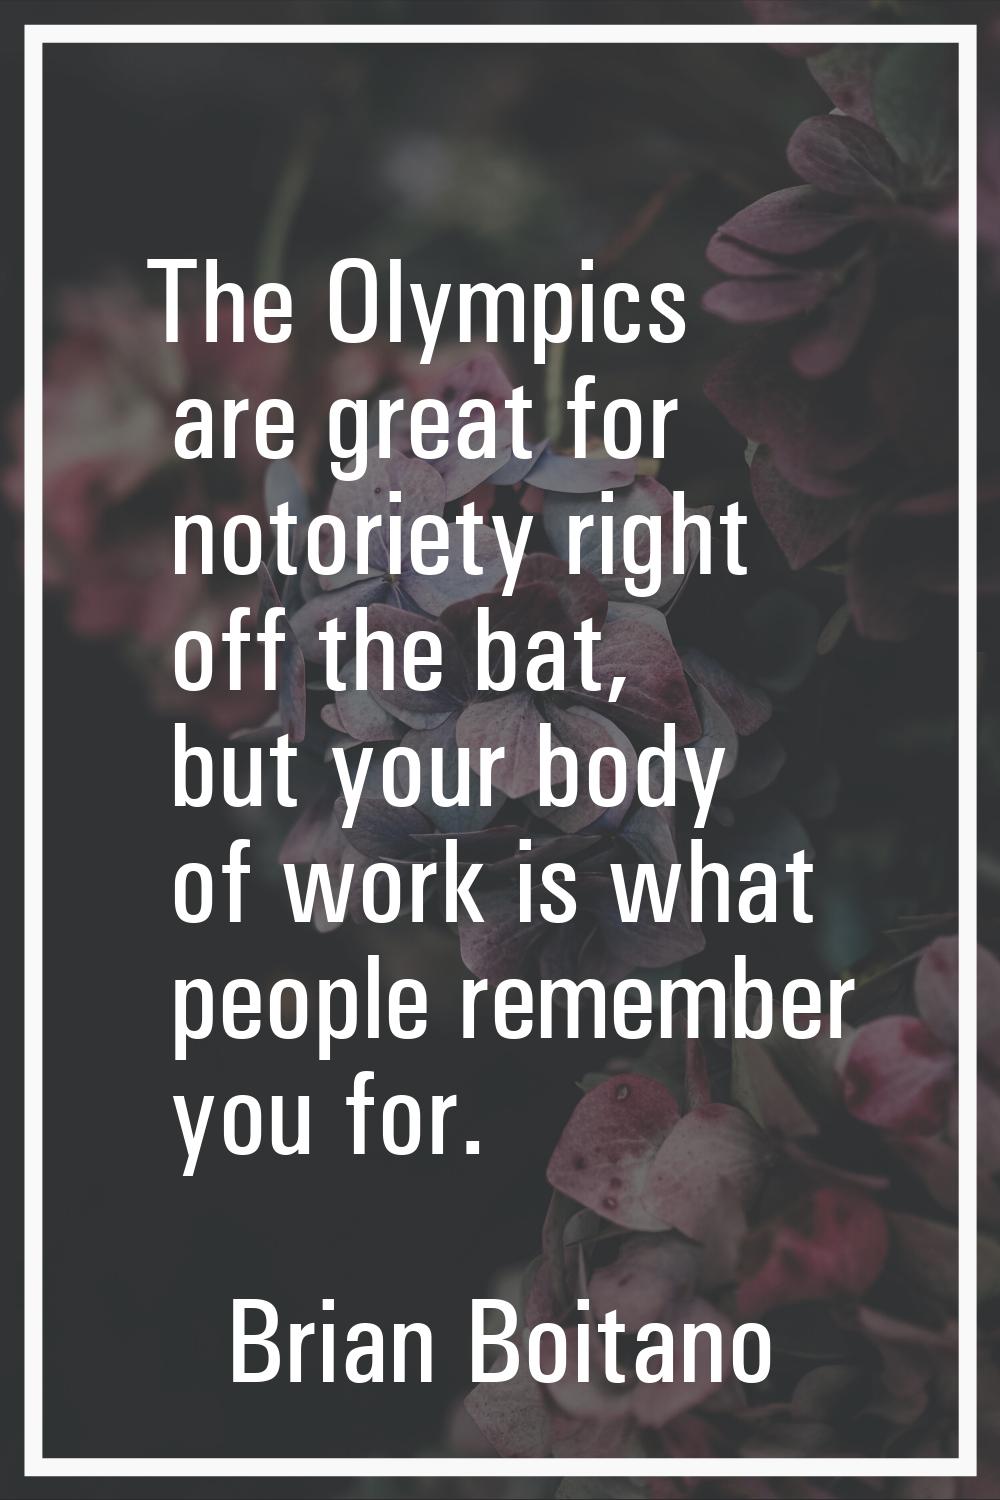 The Olympics are great for notoriety right off the bat, but your body of work is what people rememb